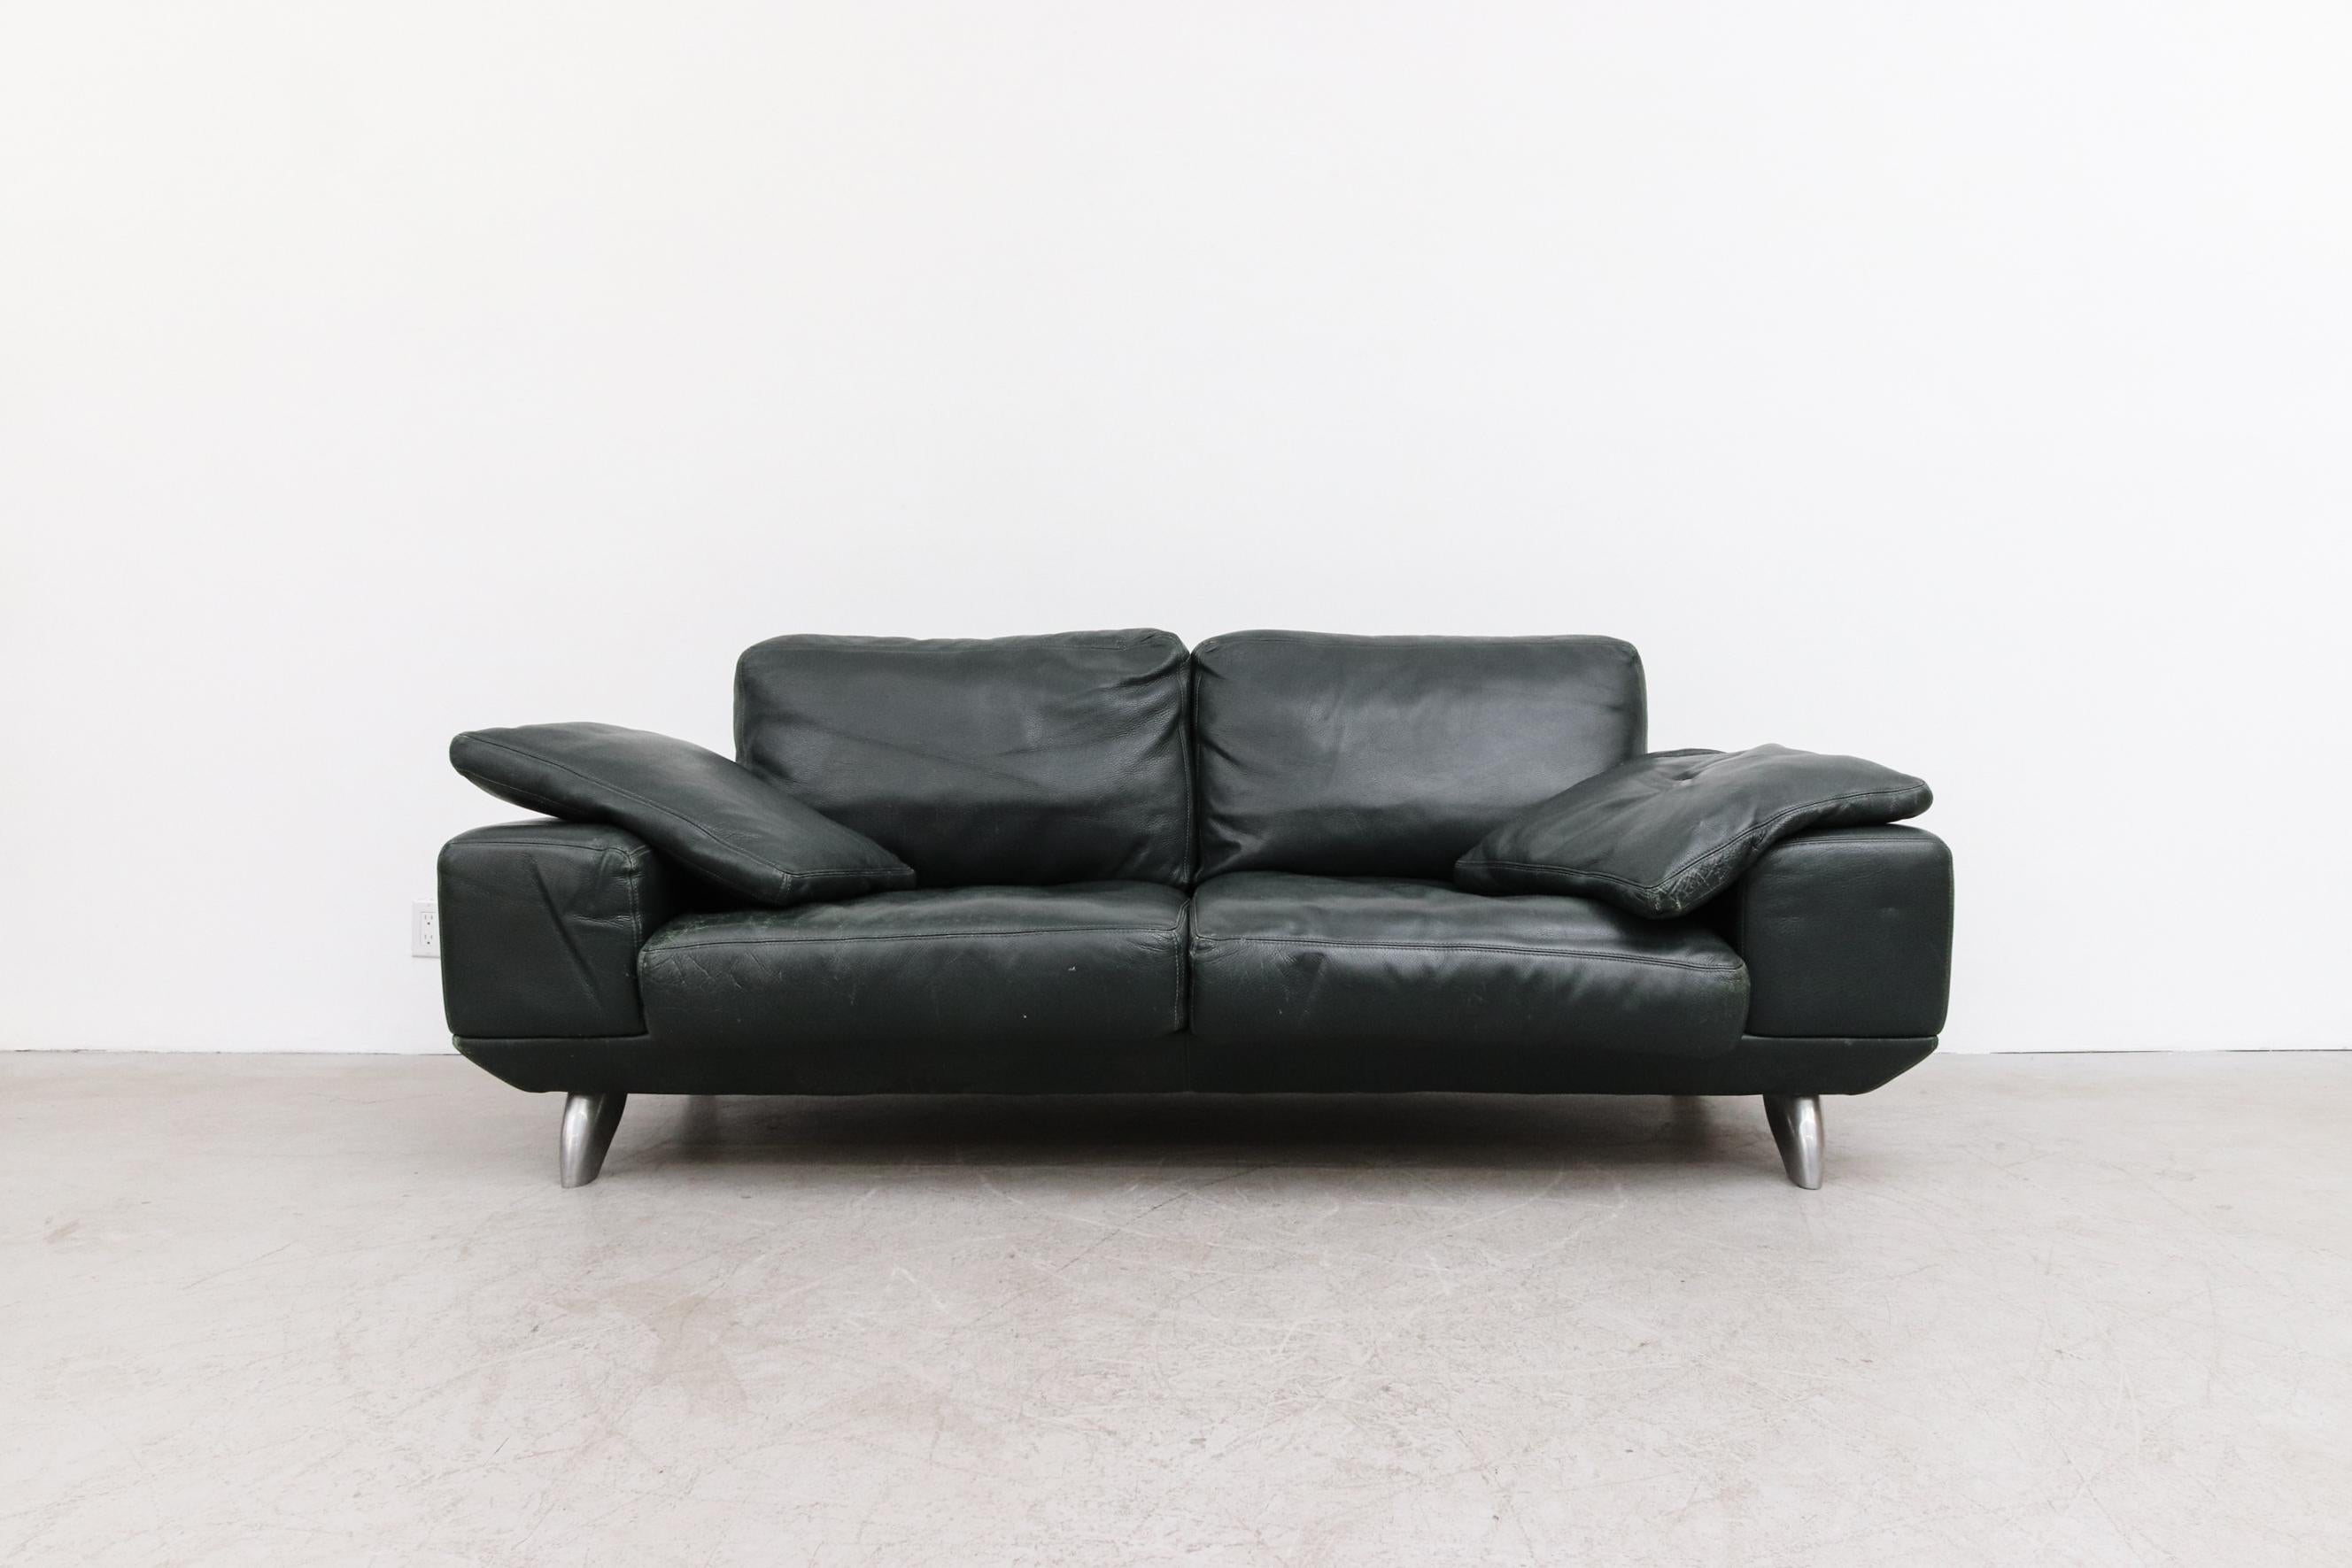 1980's MOD dark green leather sofa by Molinari. In good original condition with visible patina. Some indentations in the leather from transport that should relax over time. Has 2 matching pillows and very 80's brushed chrome feet. Wear is consistent